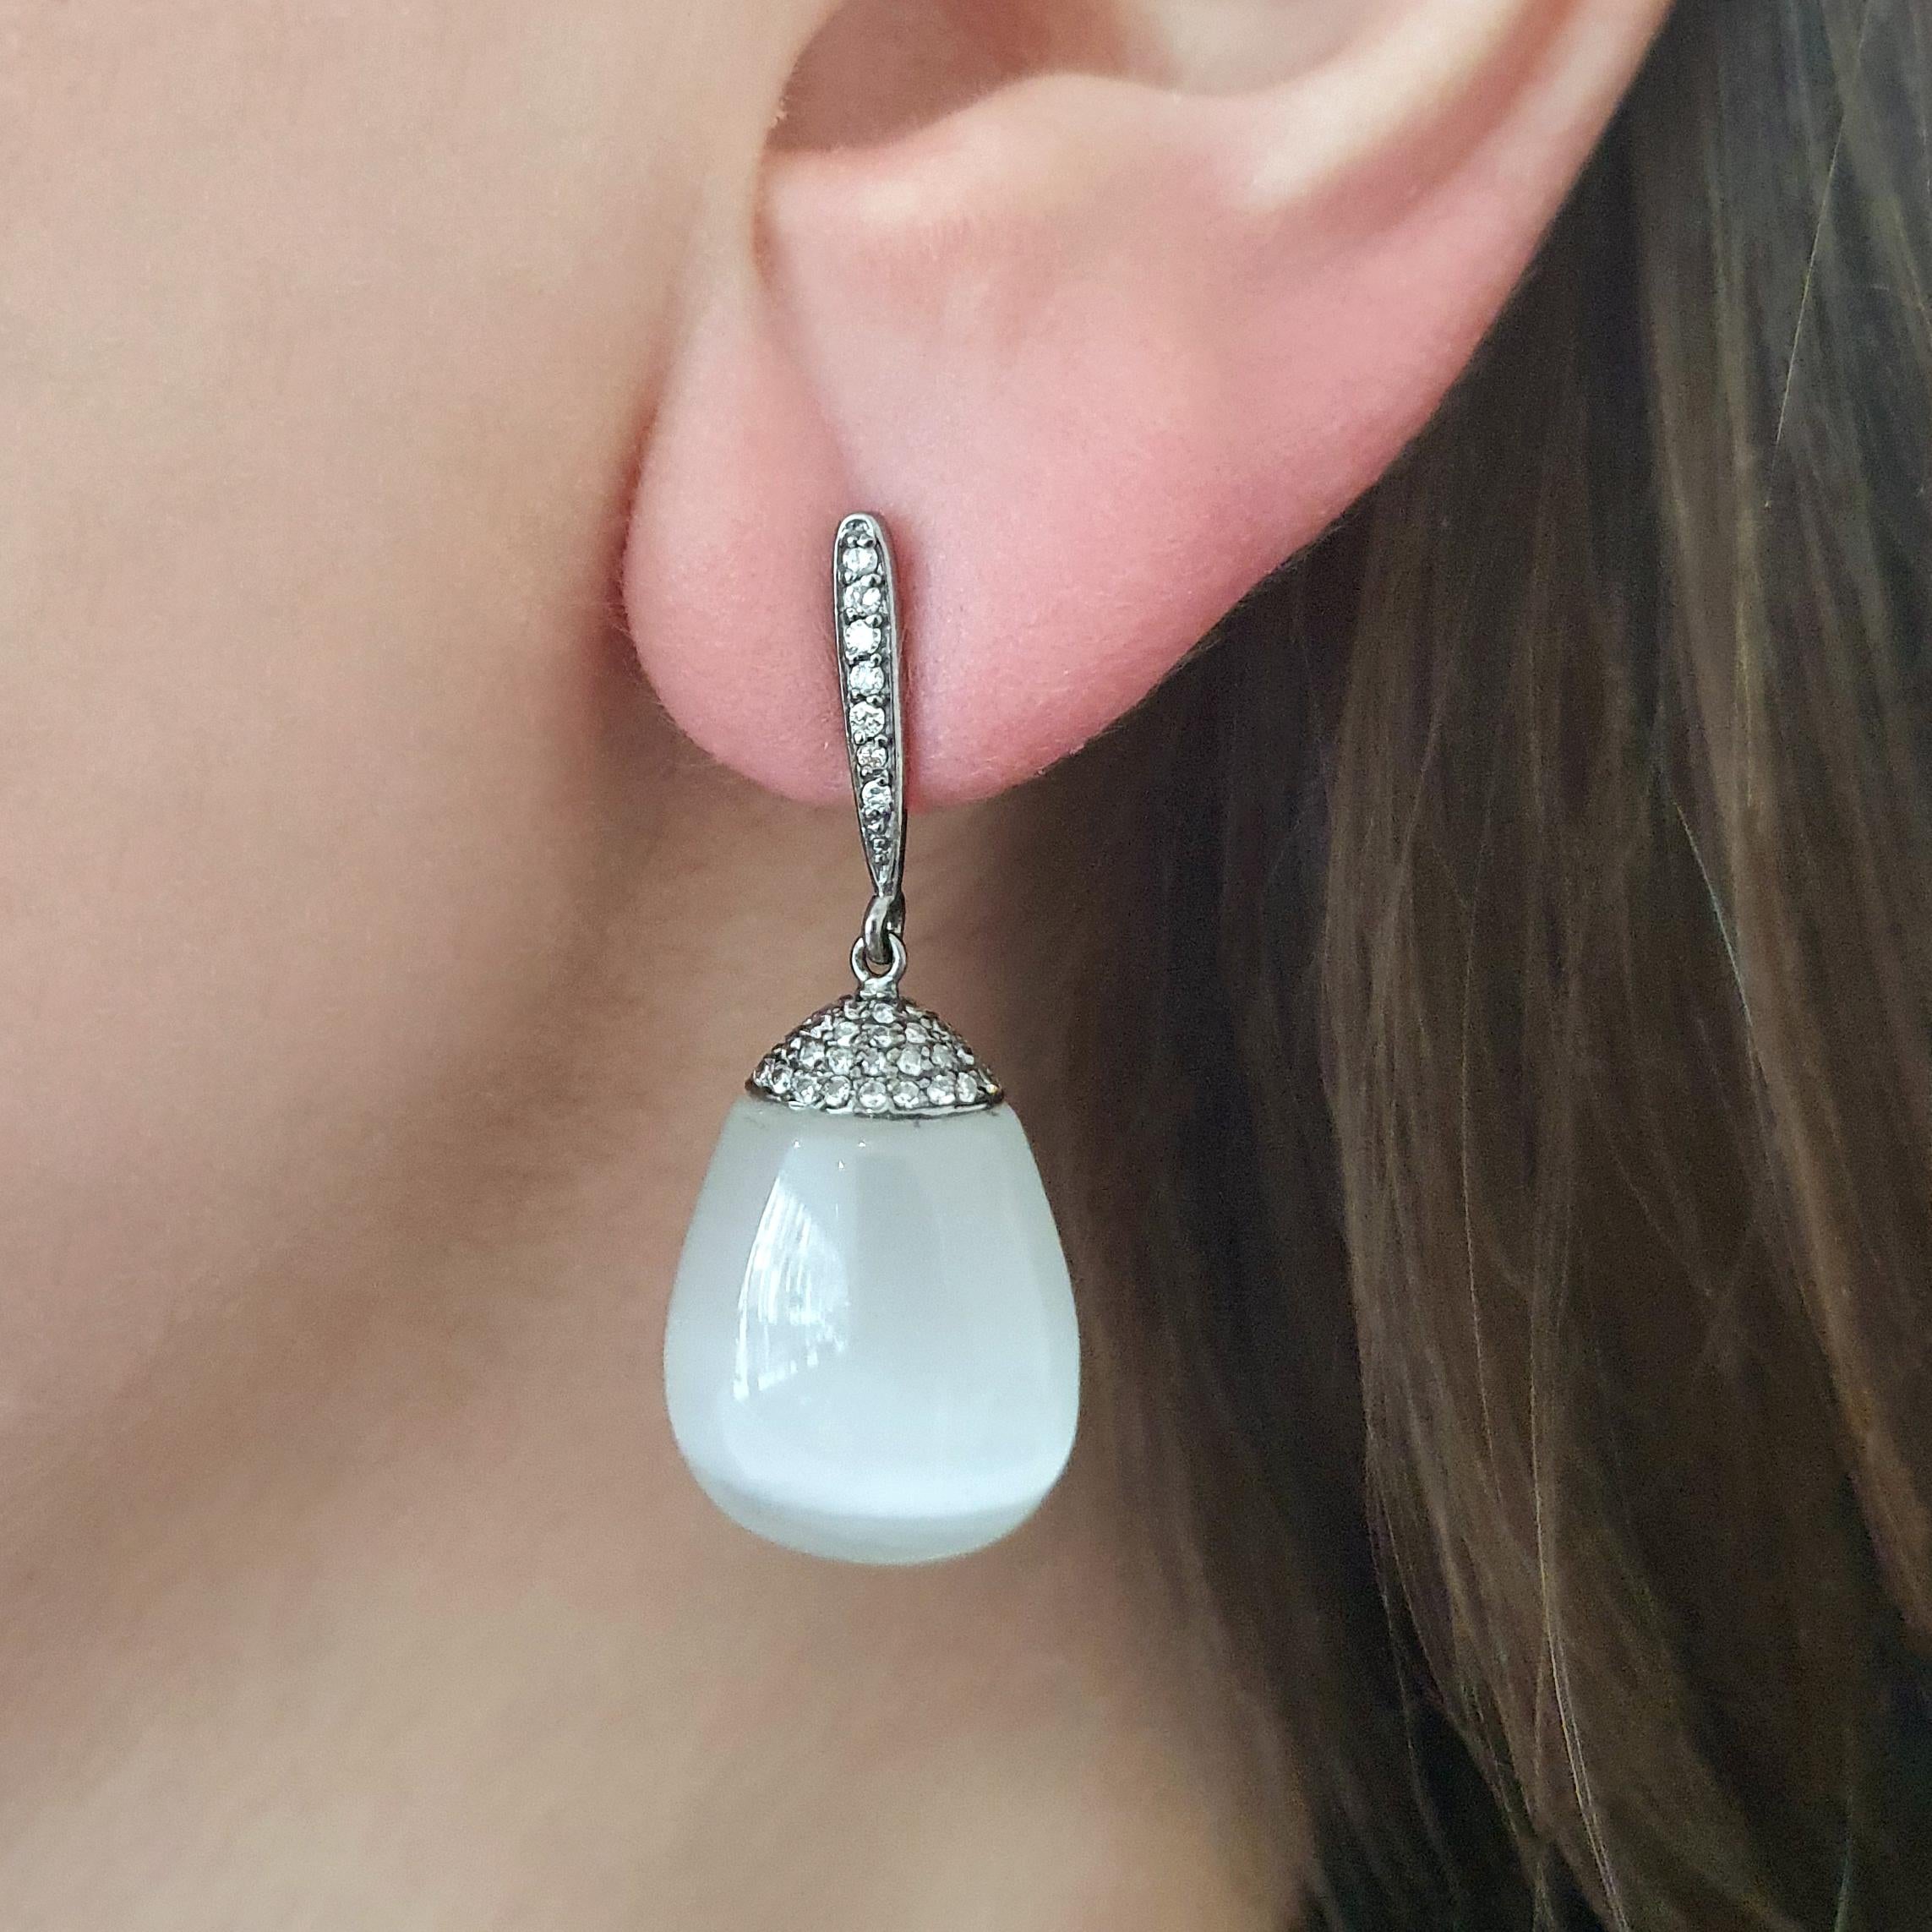 MoonStone significant drops on Diamond and Blacken Gold Ear Pendants.
Contemporary work.

Total length: 1.57 inch (4.00 centimeters).
Width at maximum: 0.59 inch (1.50 centimeters).
Total weight: 13.69 grams.